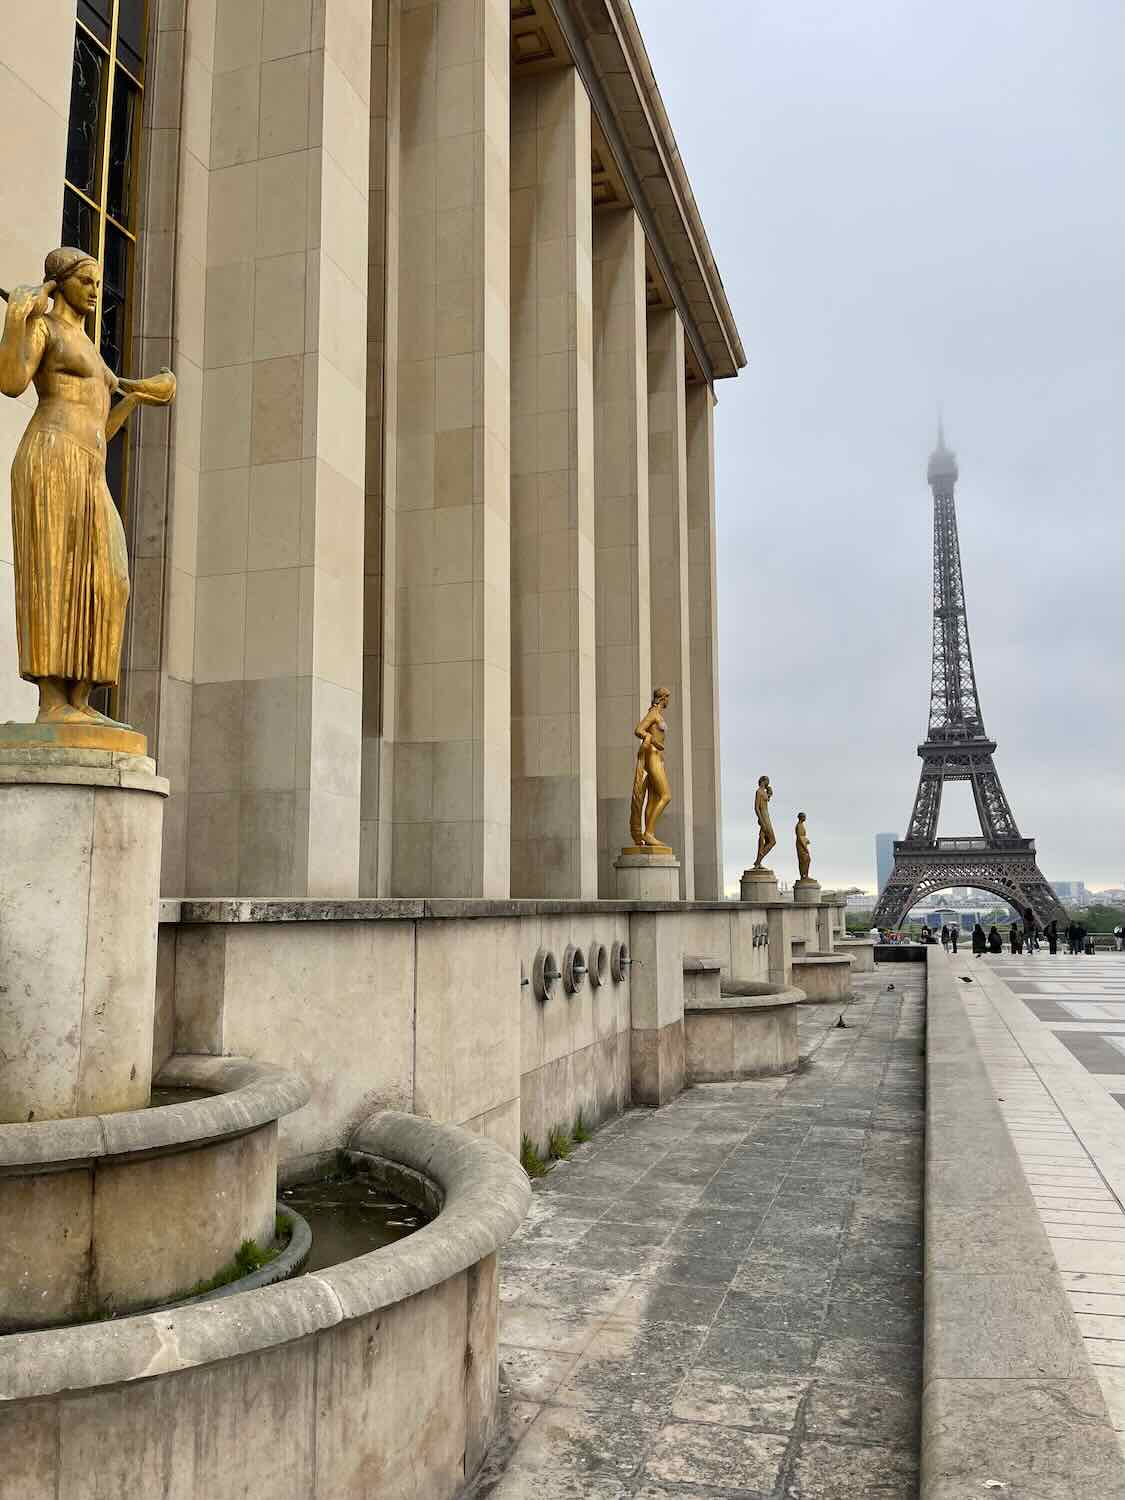 A view of the Trocadéro Gardens in Paris, featuring several golden statues along a grand building, with the Eiffel Tower rising in the misty background.